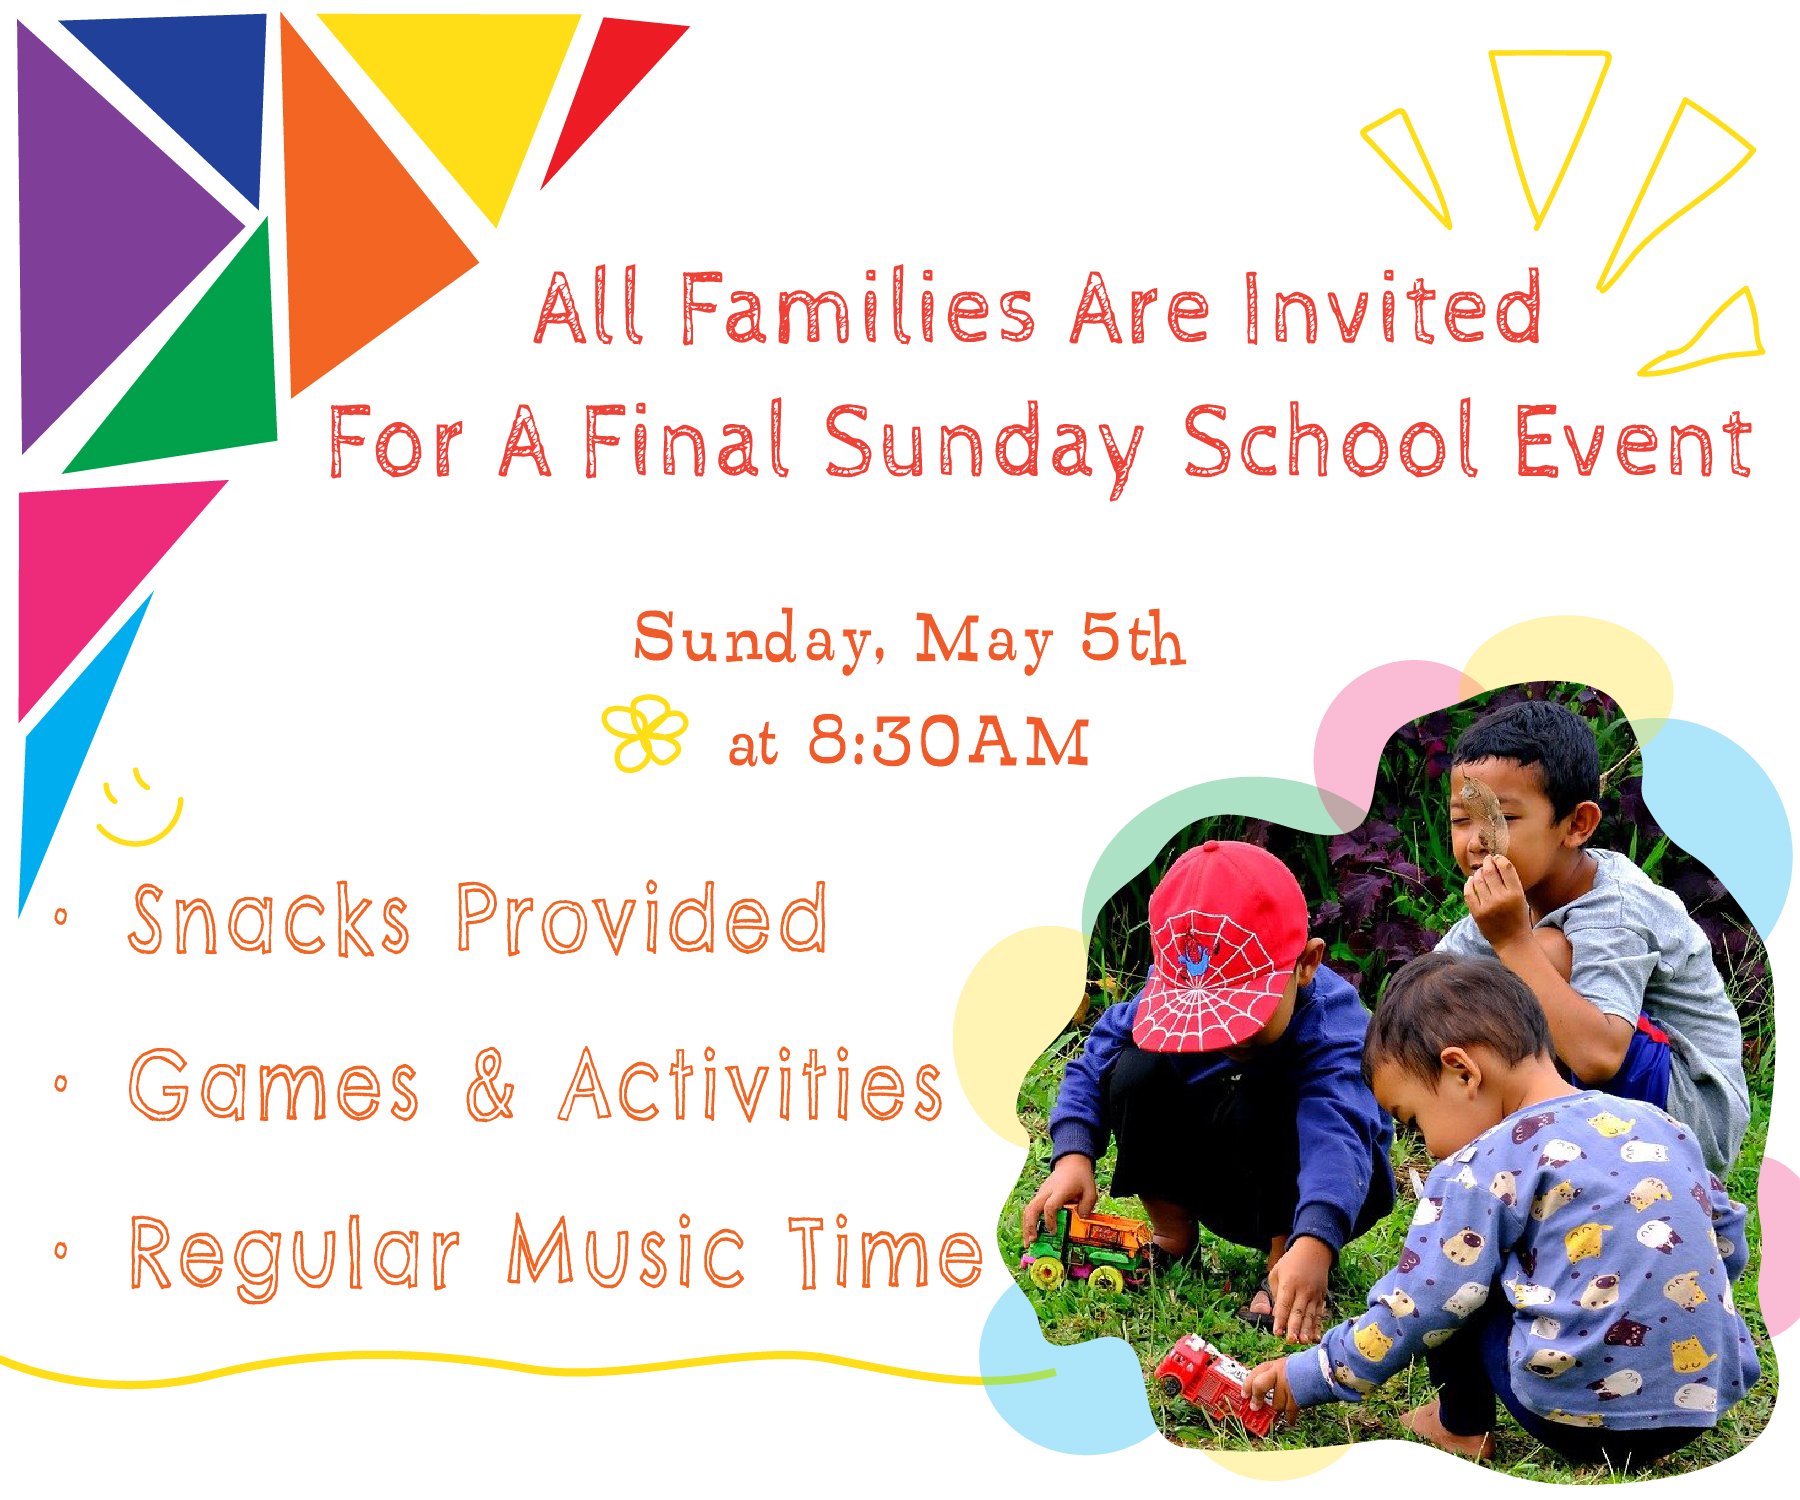 💛We will have snacks and games on the front lawn of Zion. The rain location will be the music room downstairs. We will still do our regular music time at 9:00 with Melanie, as the Sunday School kids are singing in church that day. 🌞